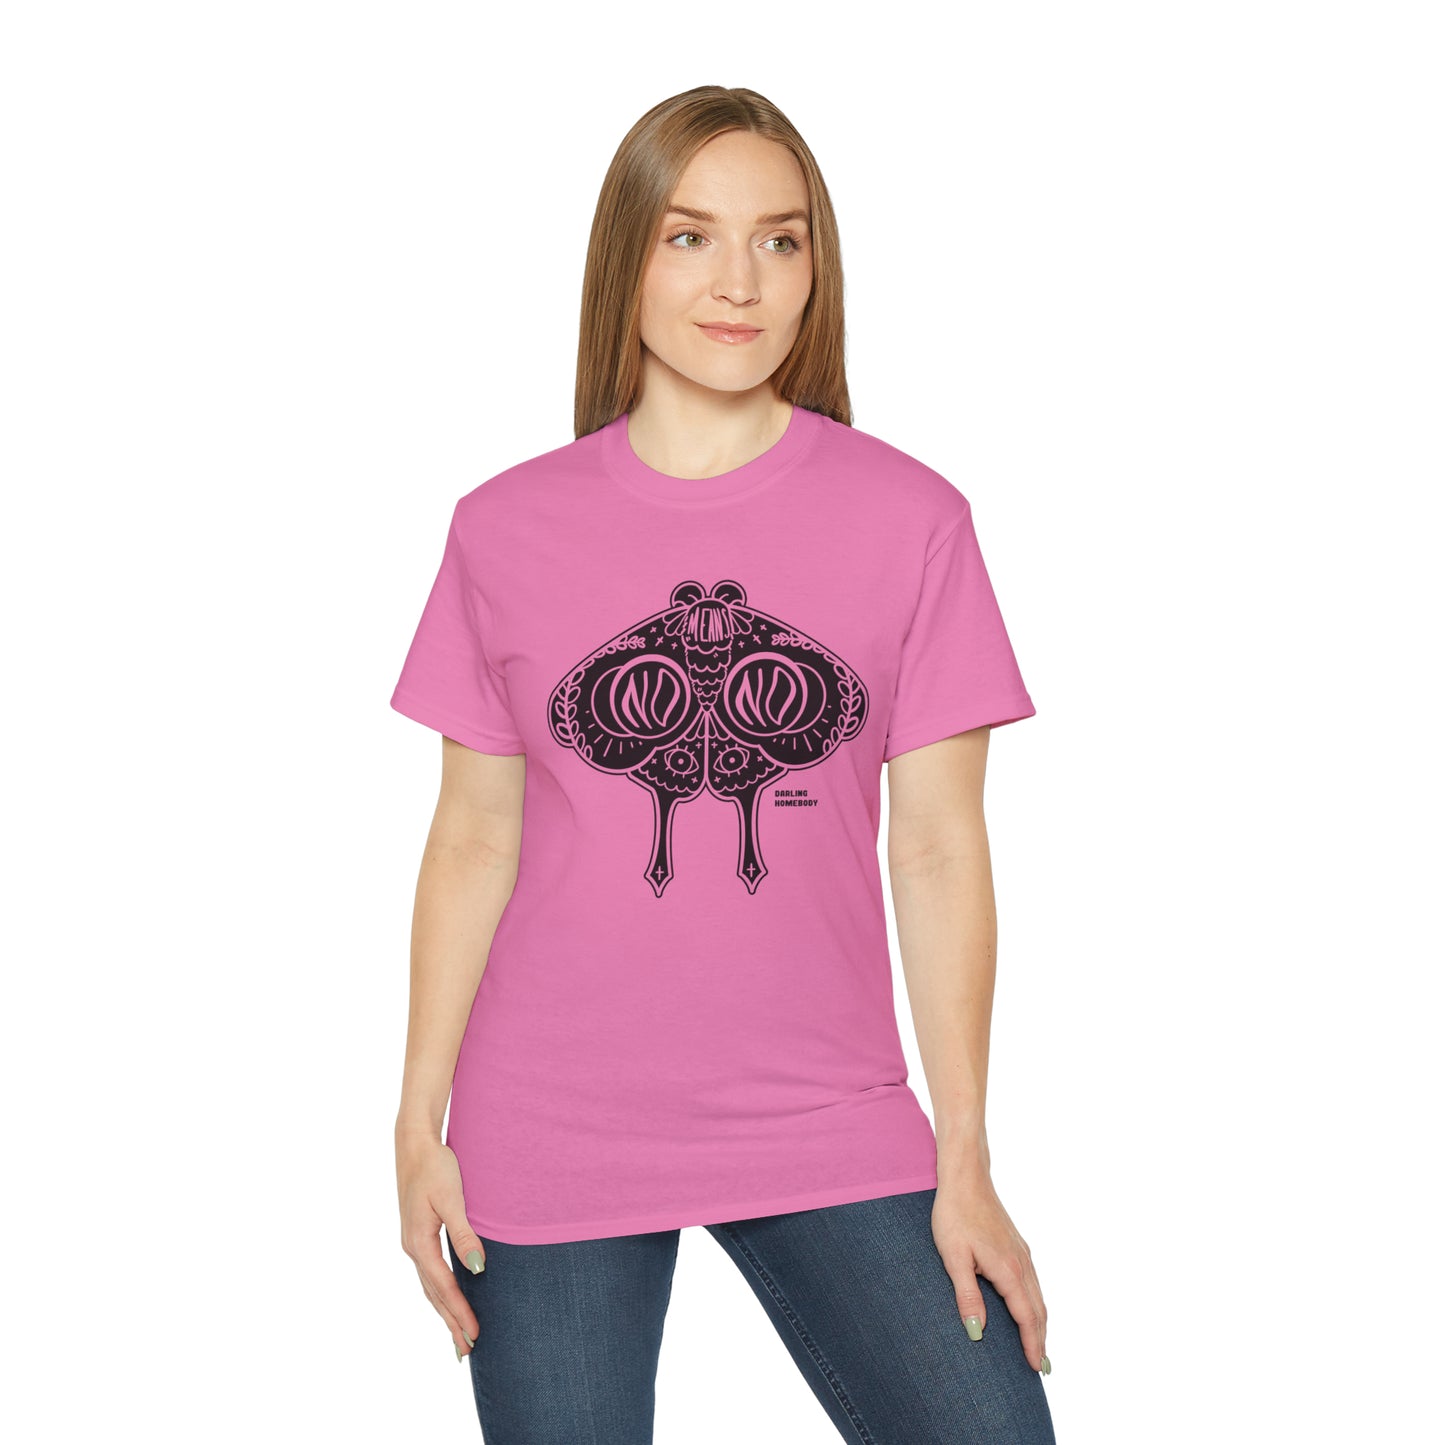 Moth No Means No Black on Light Unisex Ultra Cotton Tee